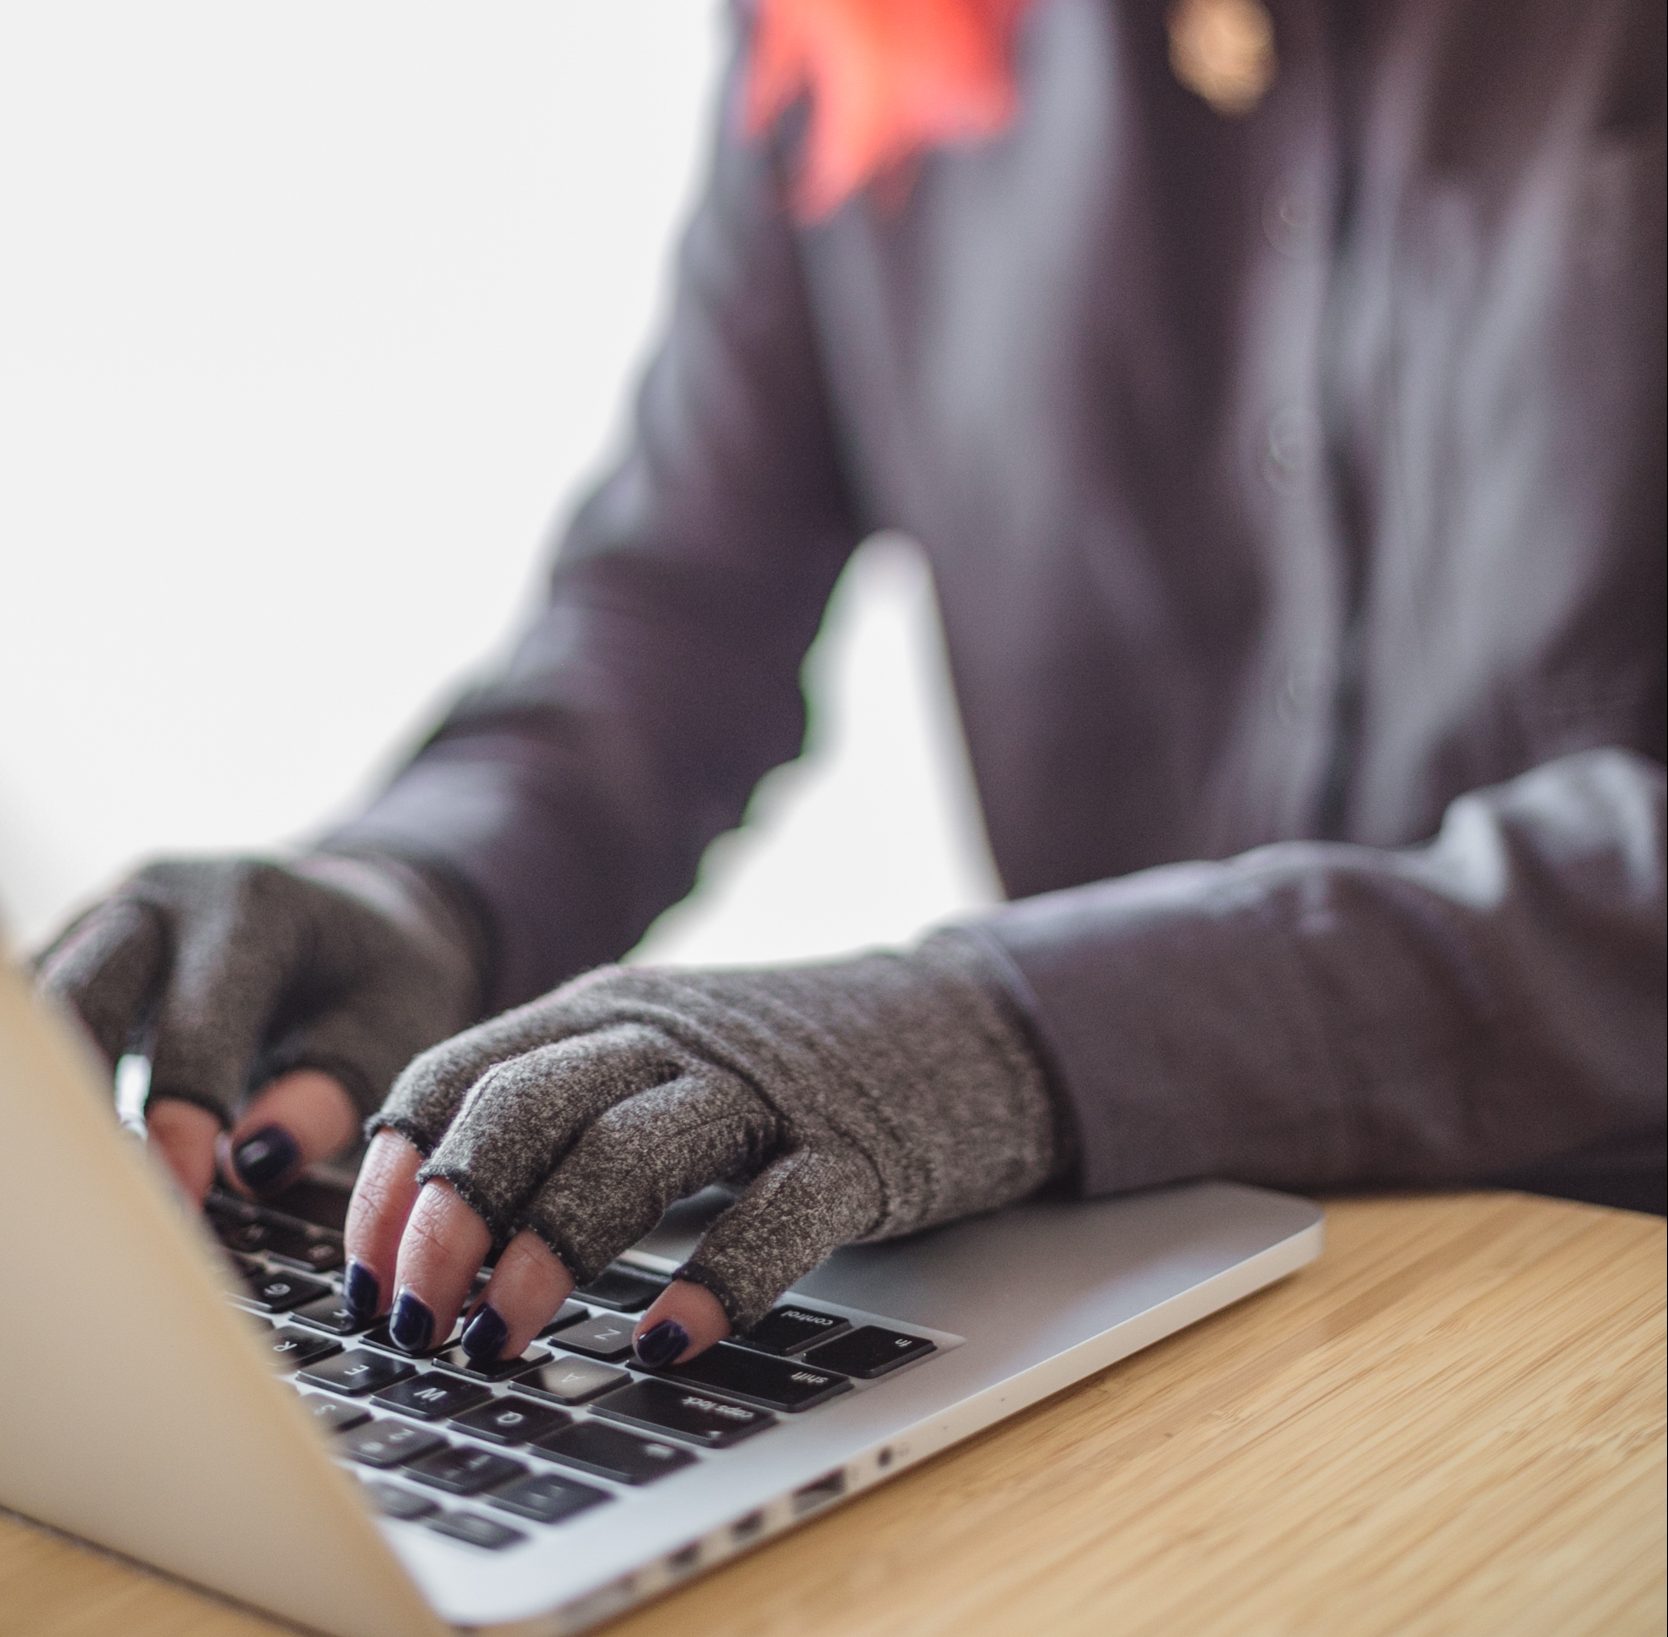 An Asian disabled woman types on a laptop while wearing compression gloves. The hands and keyboard are the focal point.